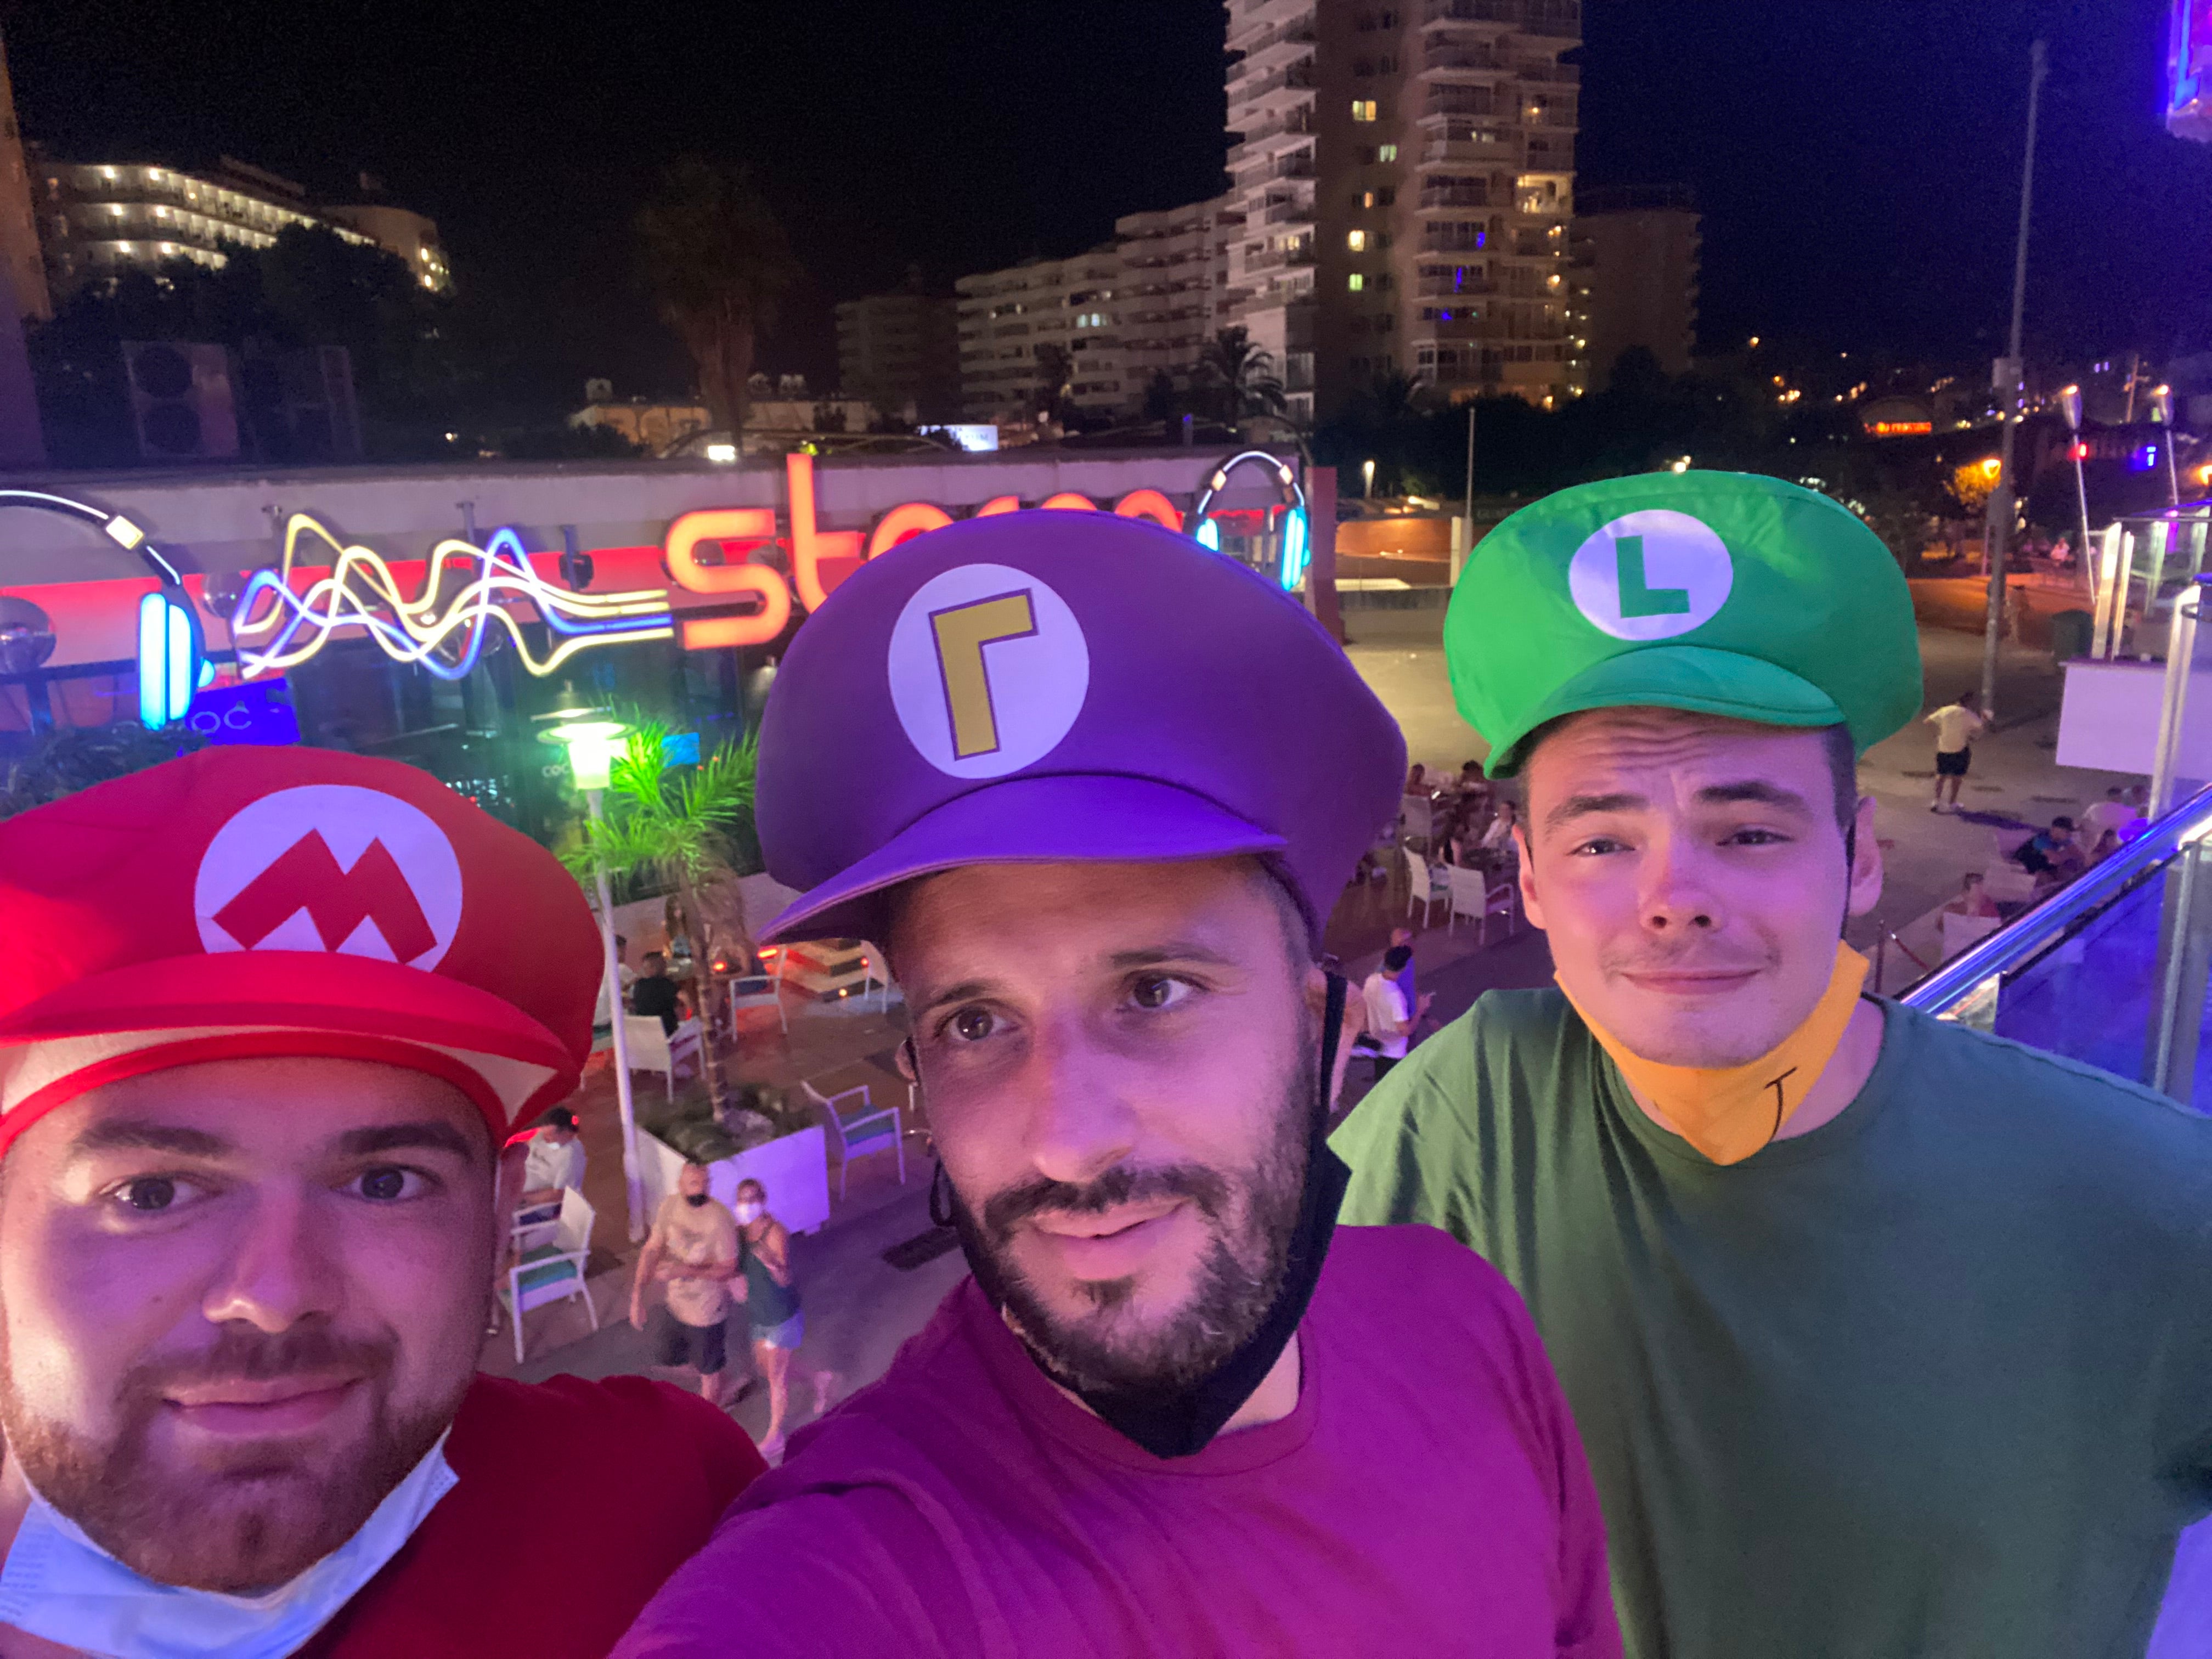 Will in costume with his fellow stags at a Super Mario-themed event